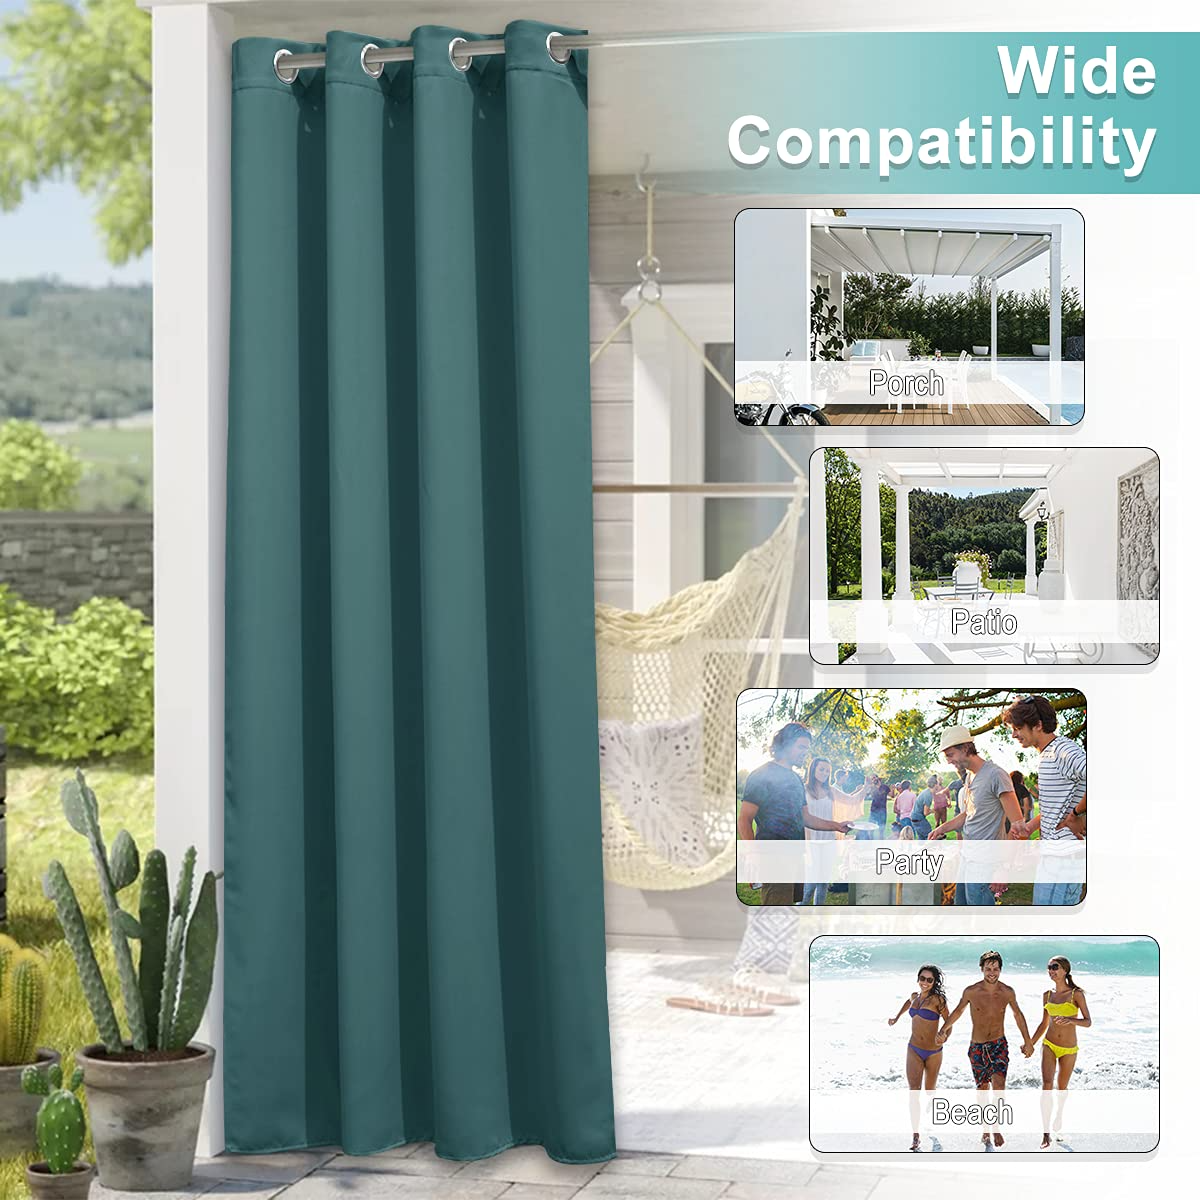 Outdoor Grommet Curtain for Patio Porch Waterproof Thermal Insulated 1 Panel KGORGE Store